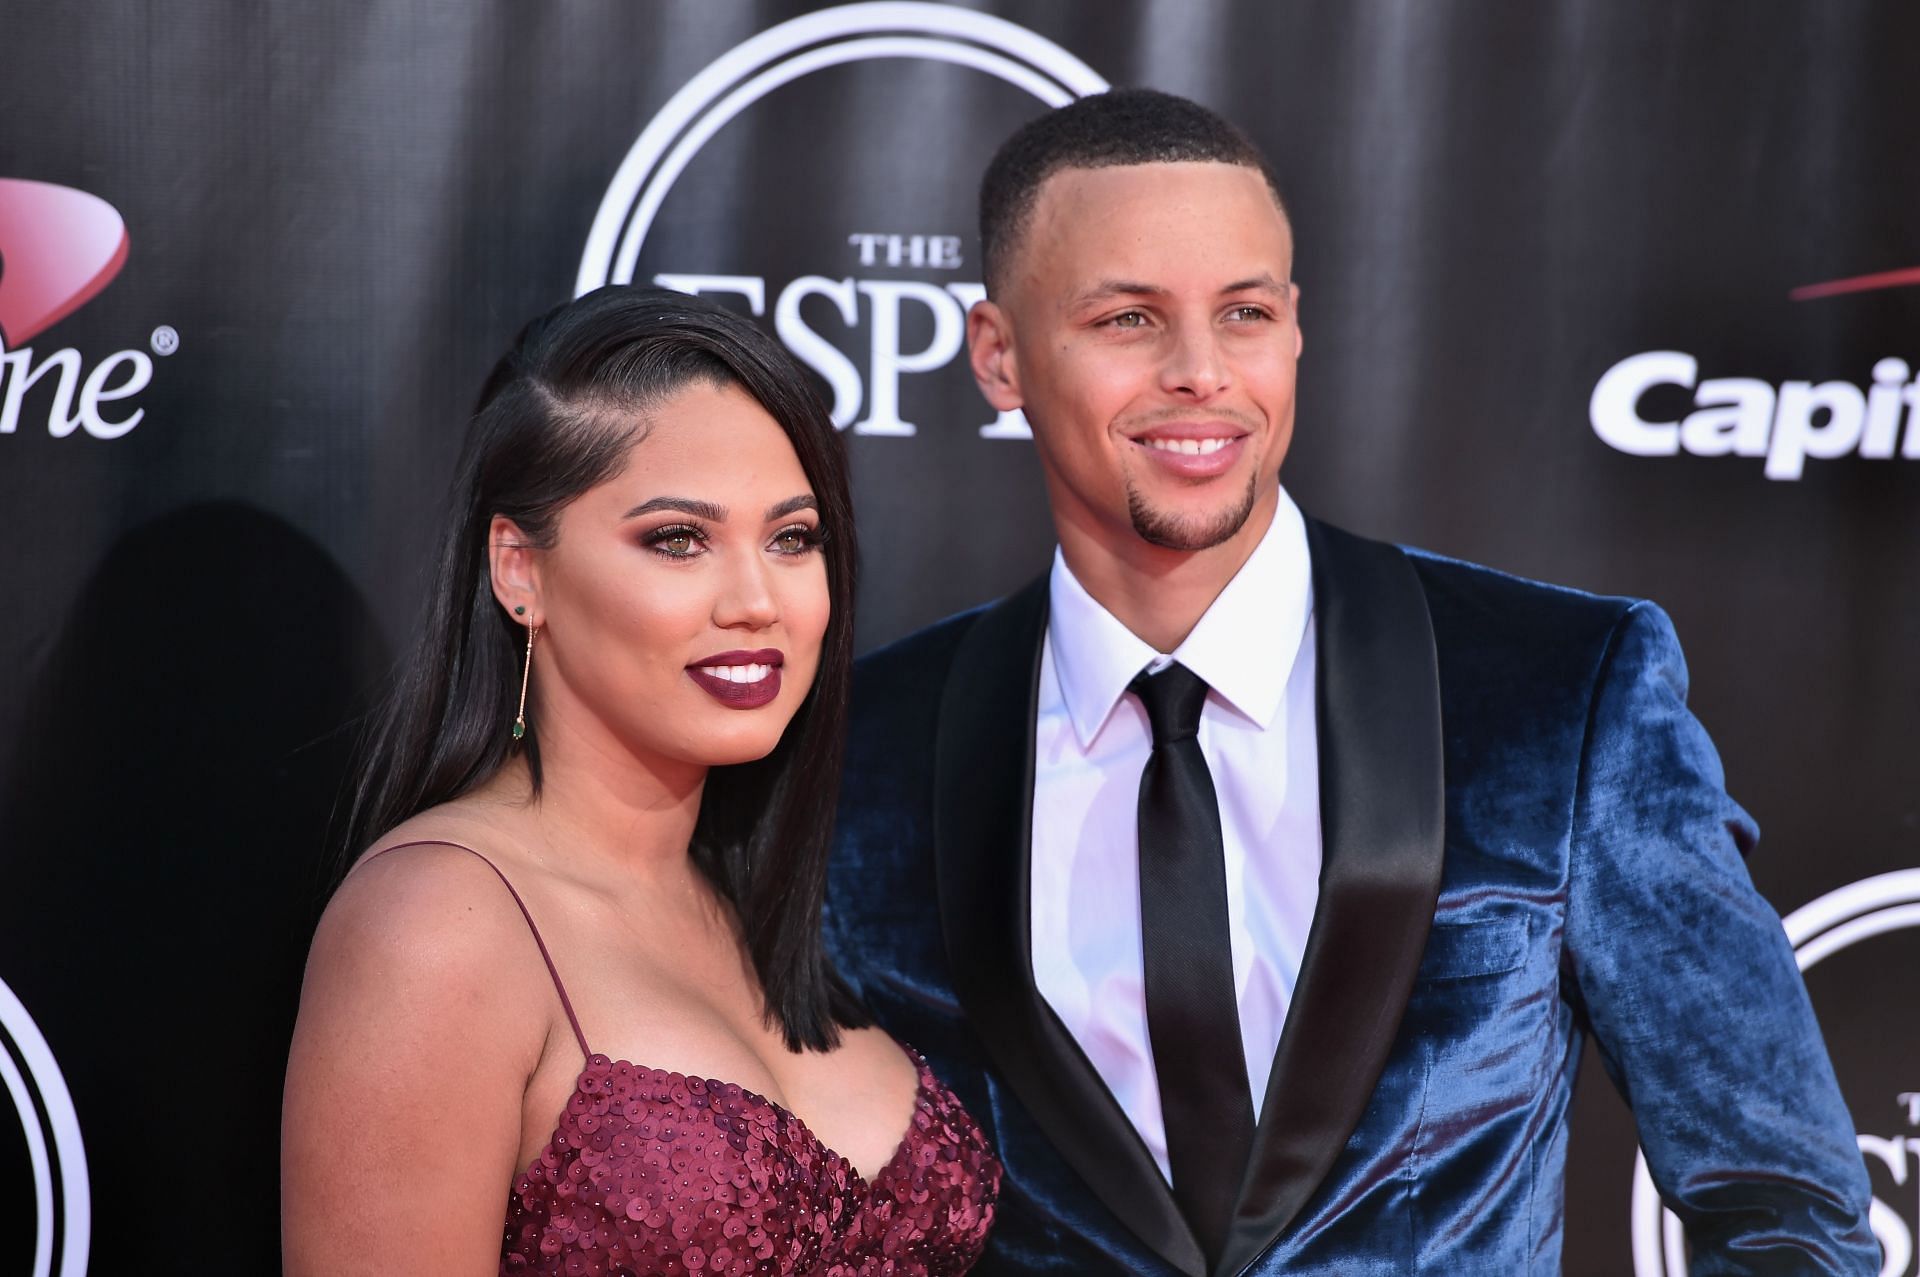 Ayesha Curry has appeared in front of TV cameras many times in the past.